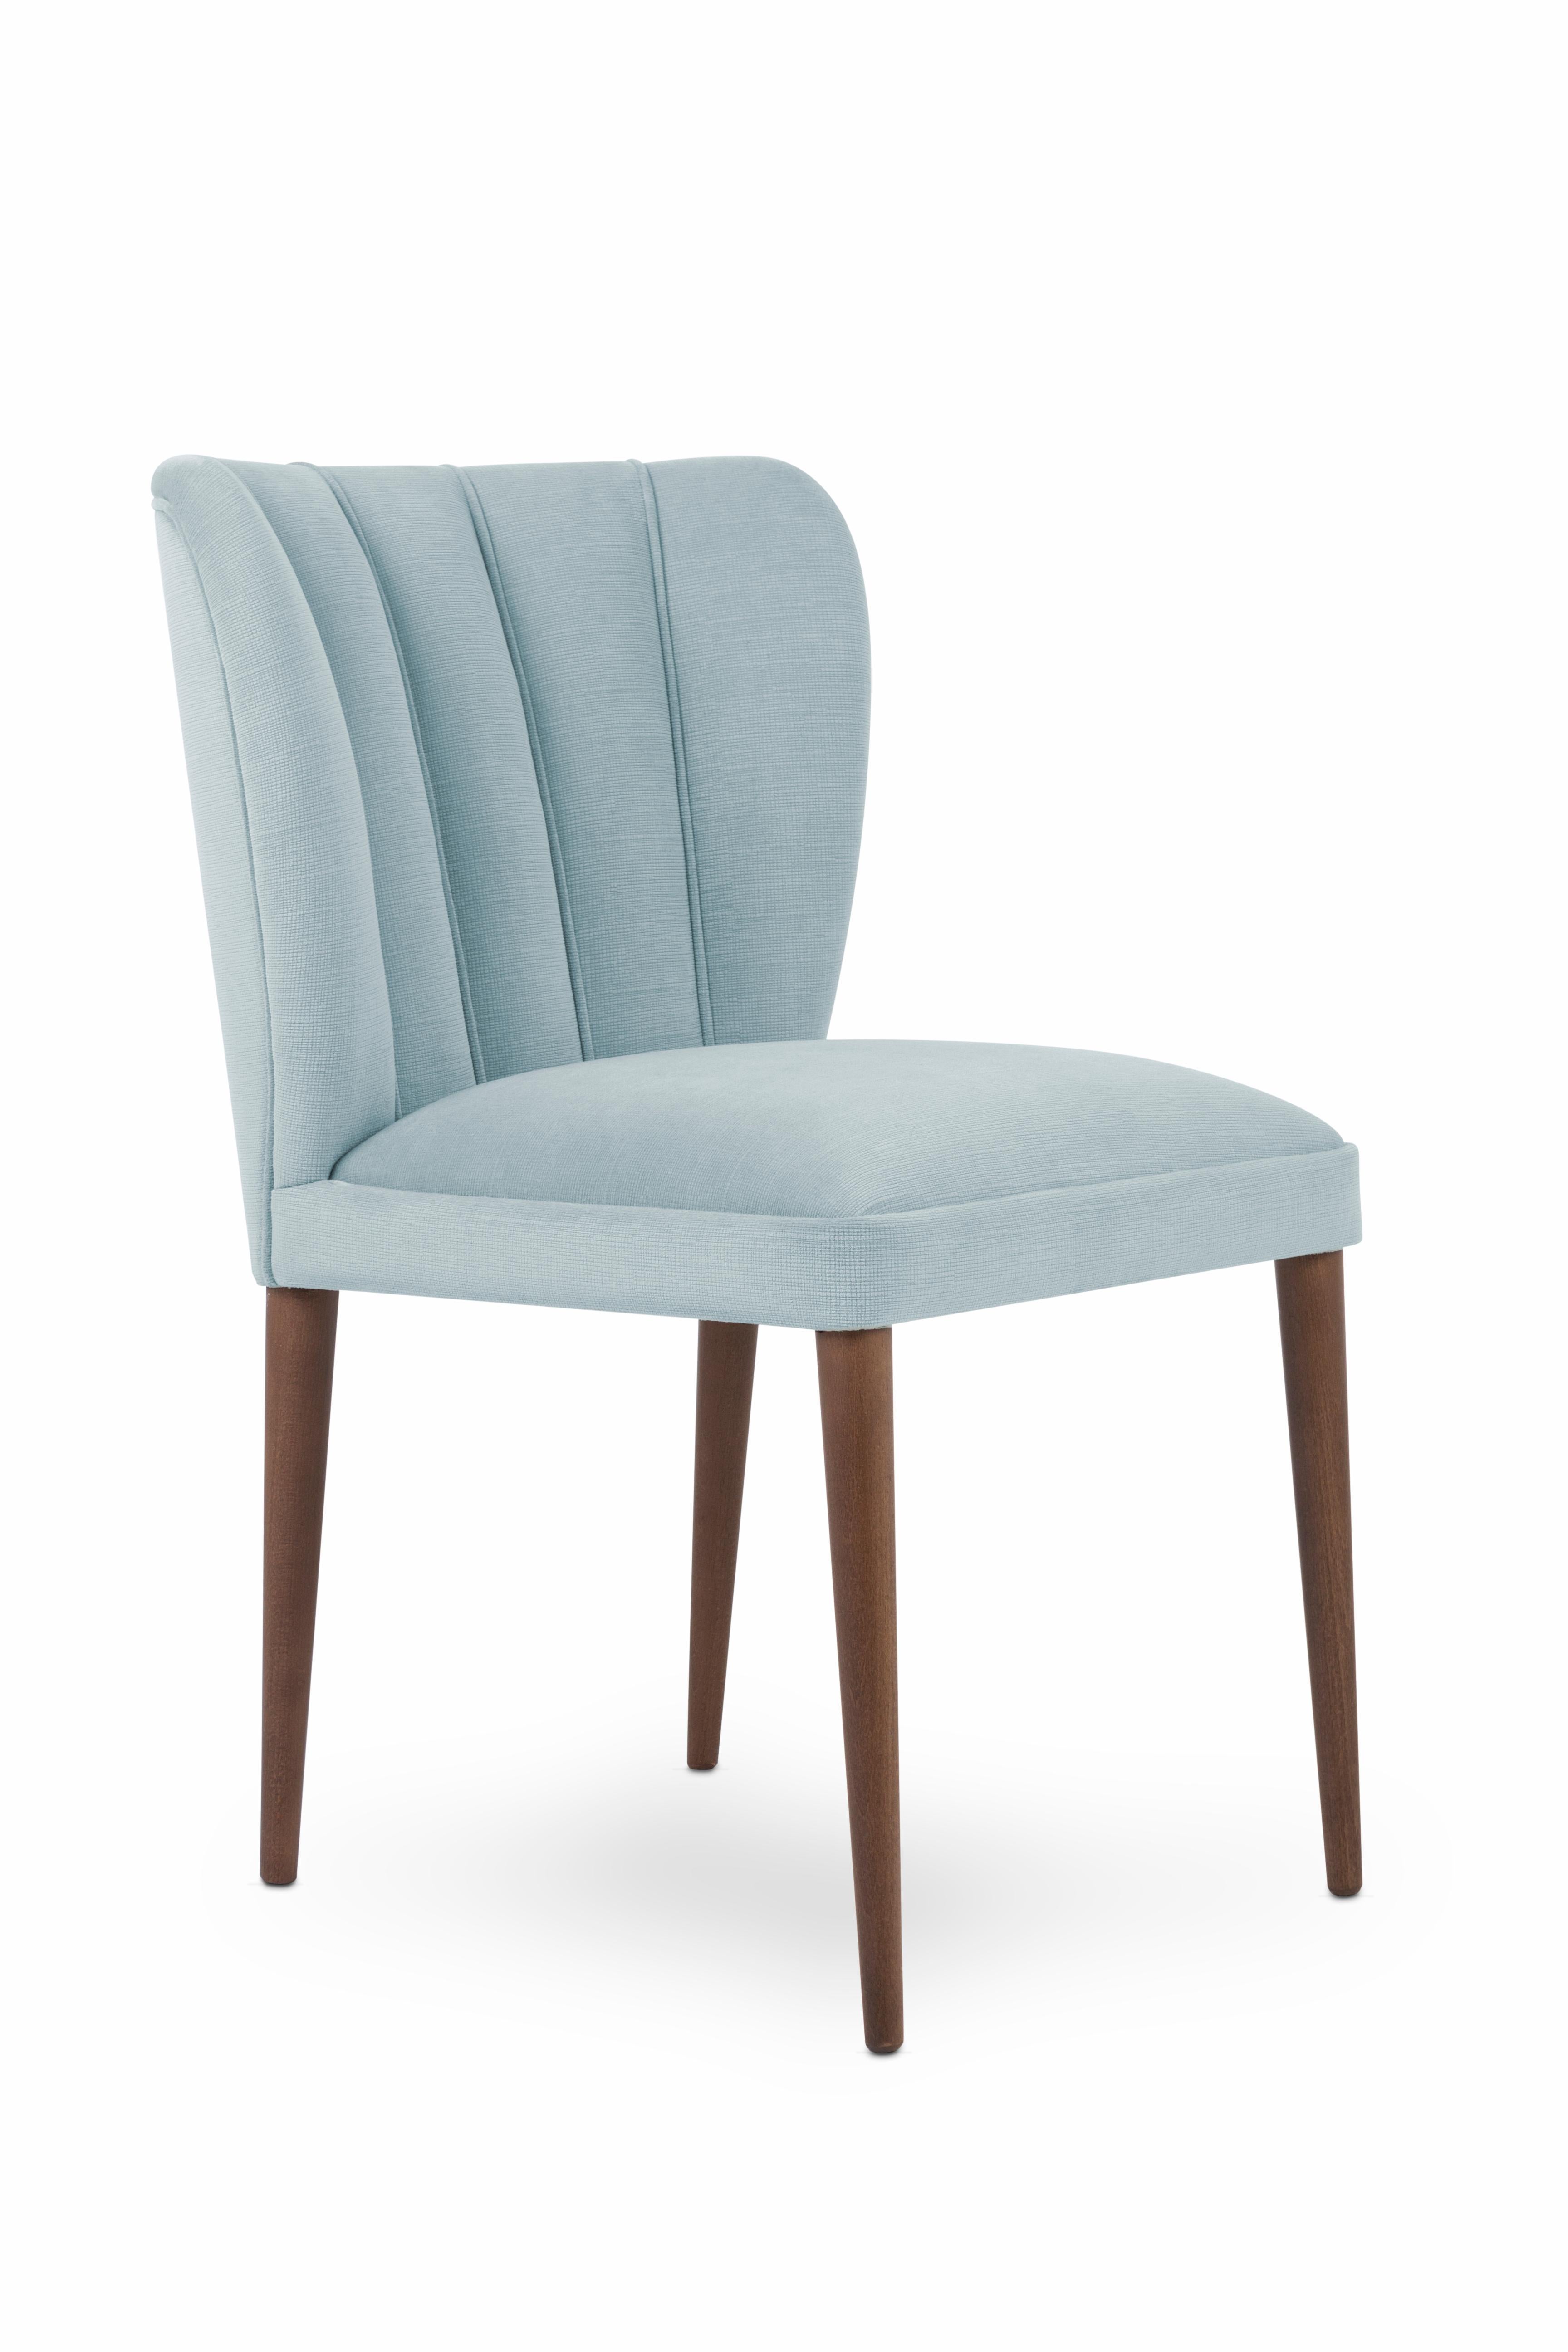 42kg foam.

With a unique shell-shaped interior, the Agata chair is the perfect combination of comfort and class!

This contemporary chair with ash/beech feet with a stain finish is a charming addition to any room and design style, especially if you